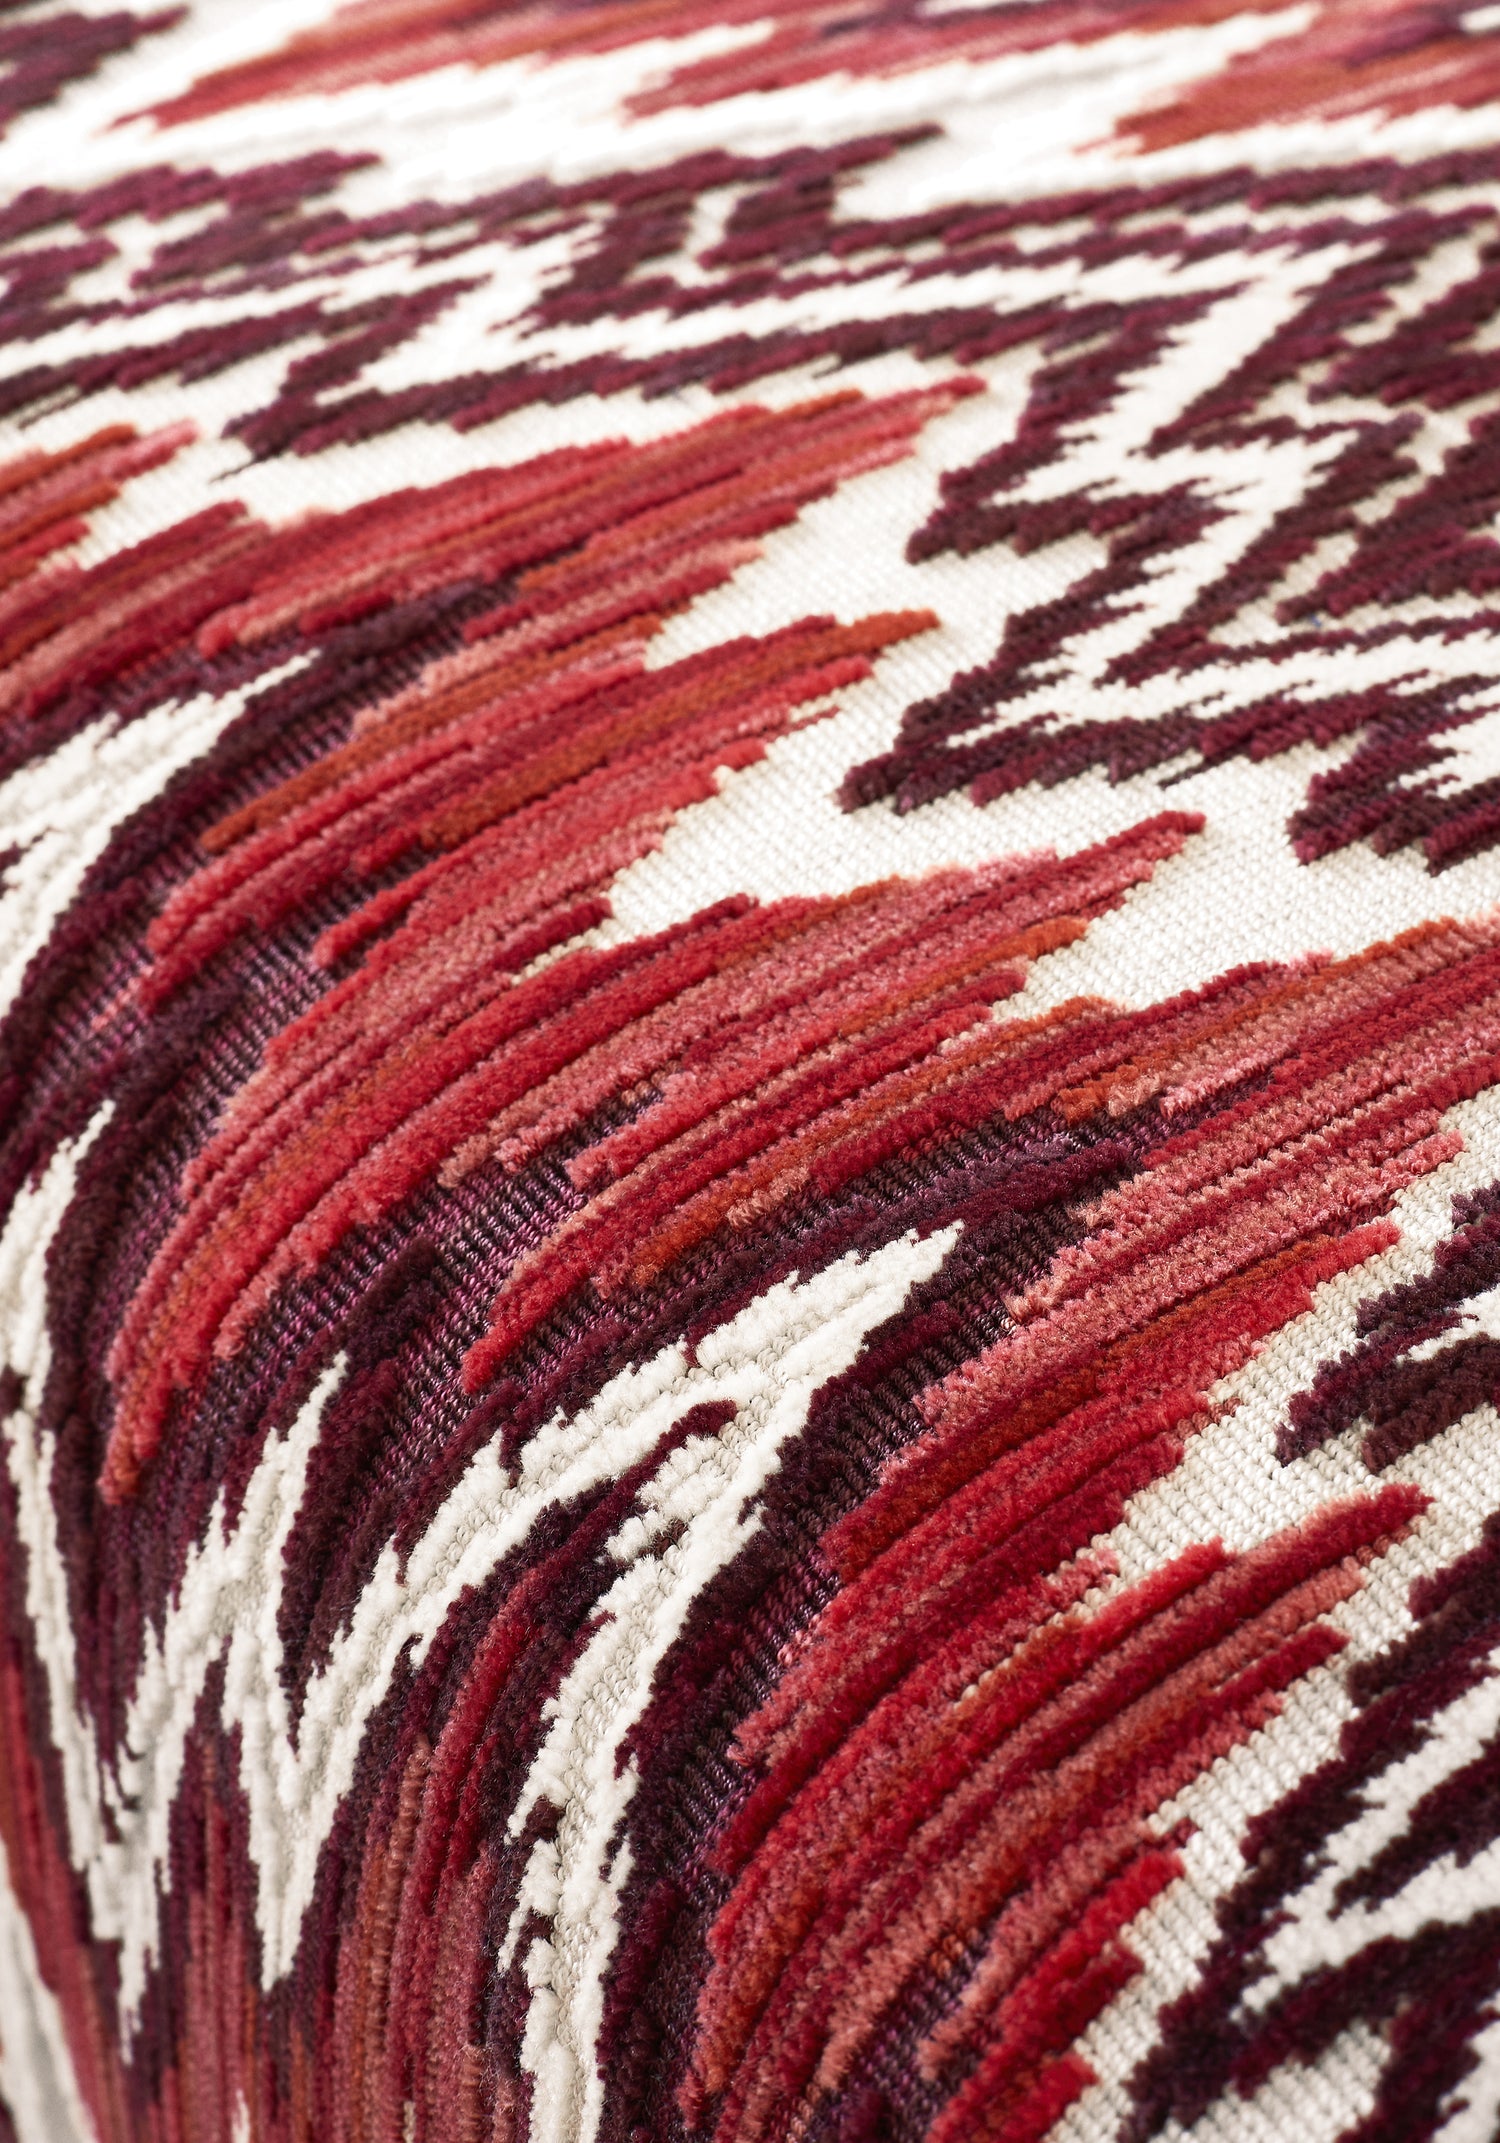 Detailed Rhythm Velvet woven fabric in ruby and garnet color - pattern number W72818 by Thibaut in the Woven Resource Vol 13 Fusion Velvets collection